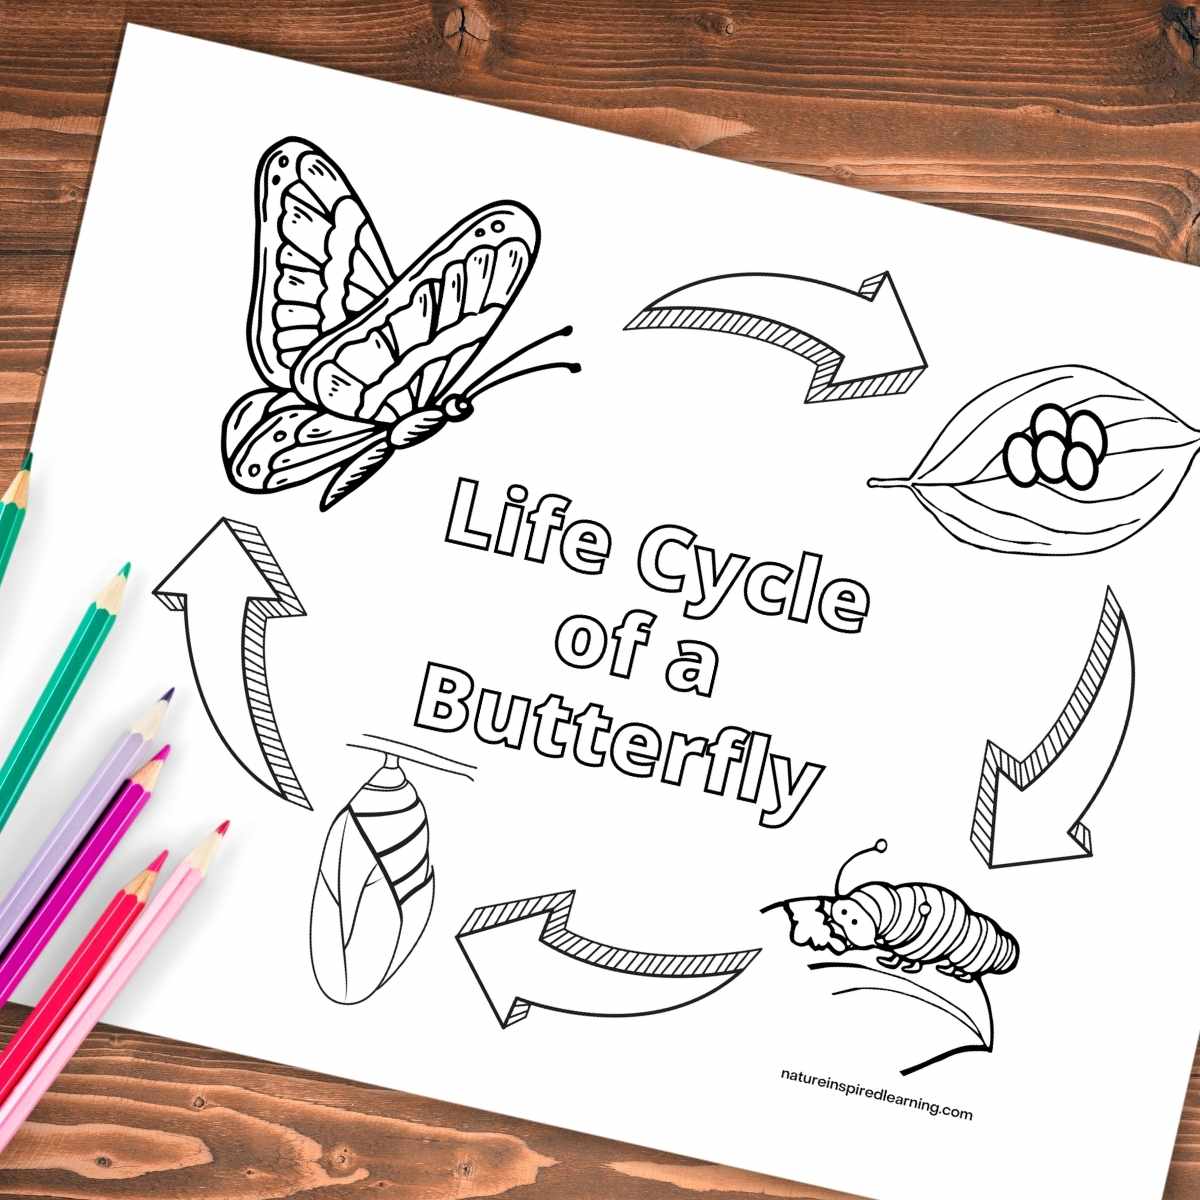 Life cycle of a butterfly coloring pages